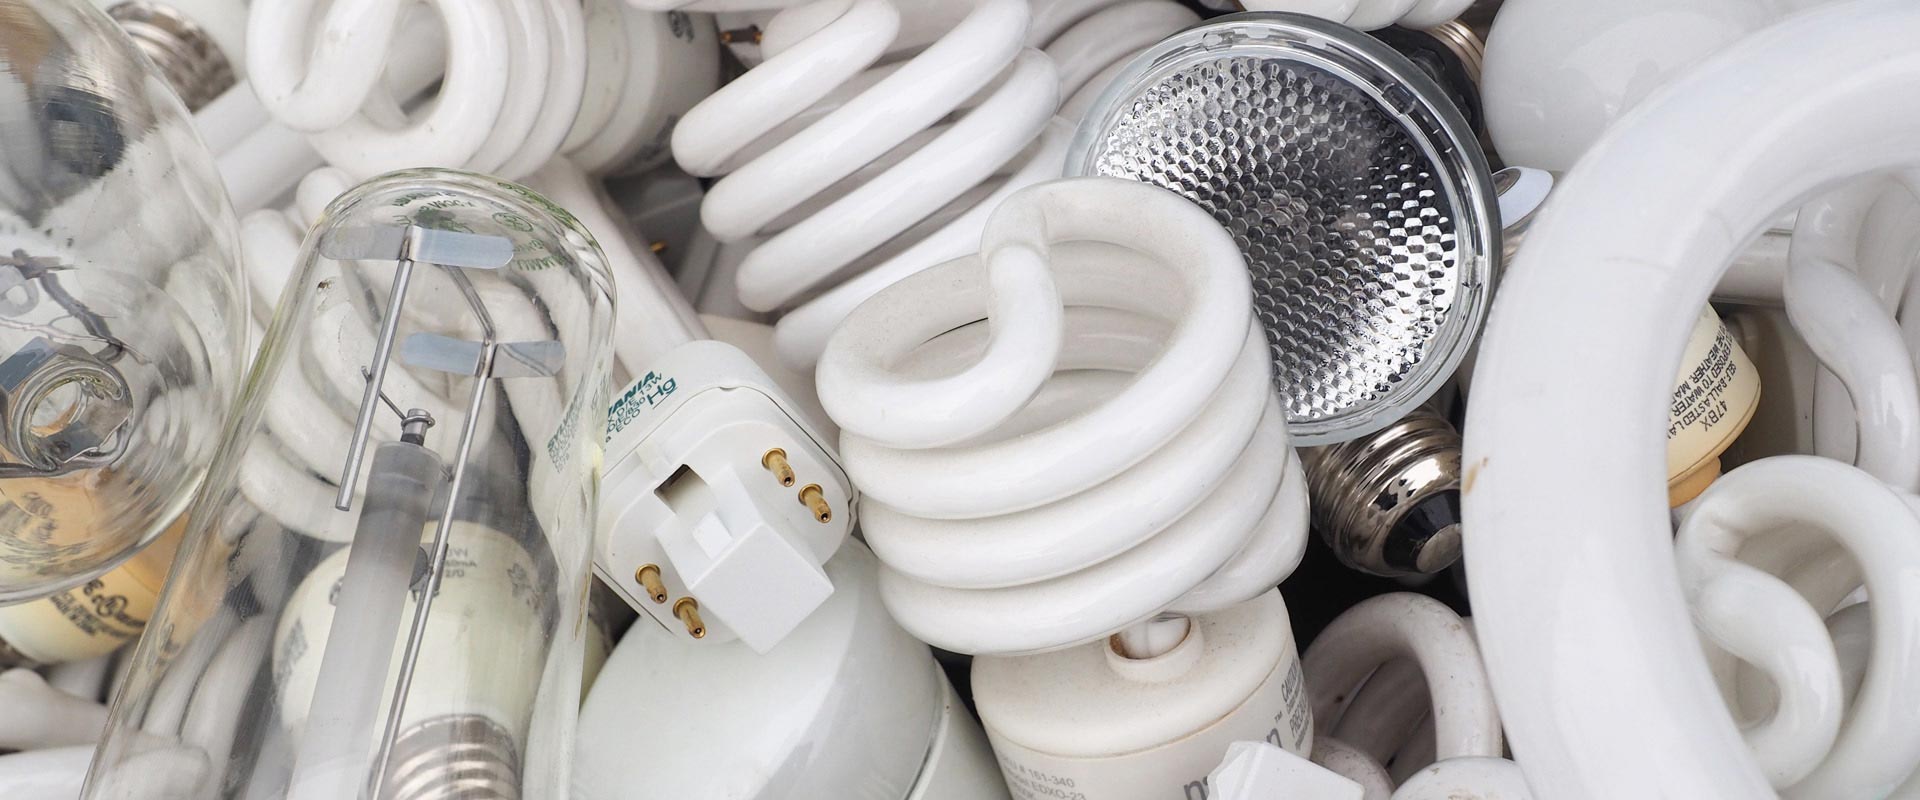 A picture of compact fluorescent blubs, pin lamps, hid bulbs, and halgoen bulbs. NLR recycles lamps and fluorescent bulbs.